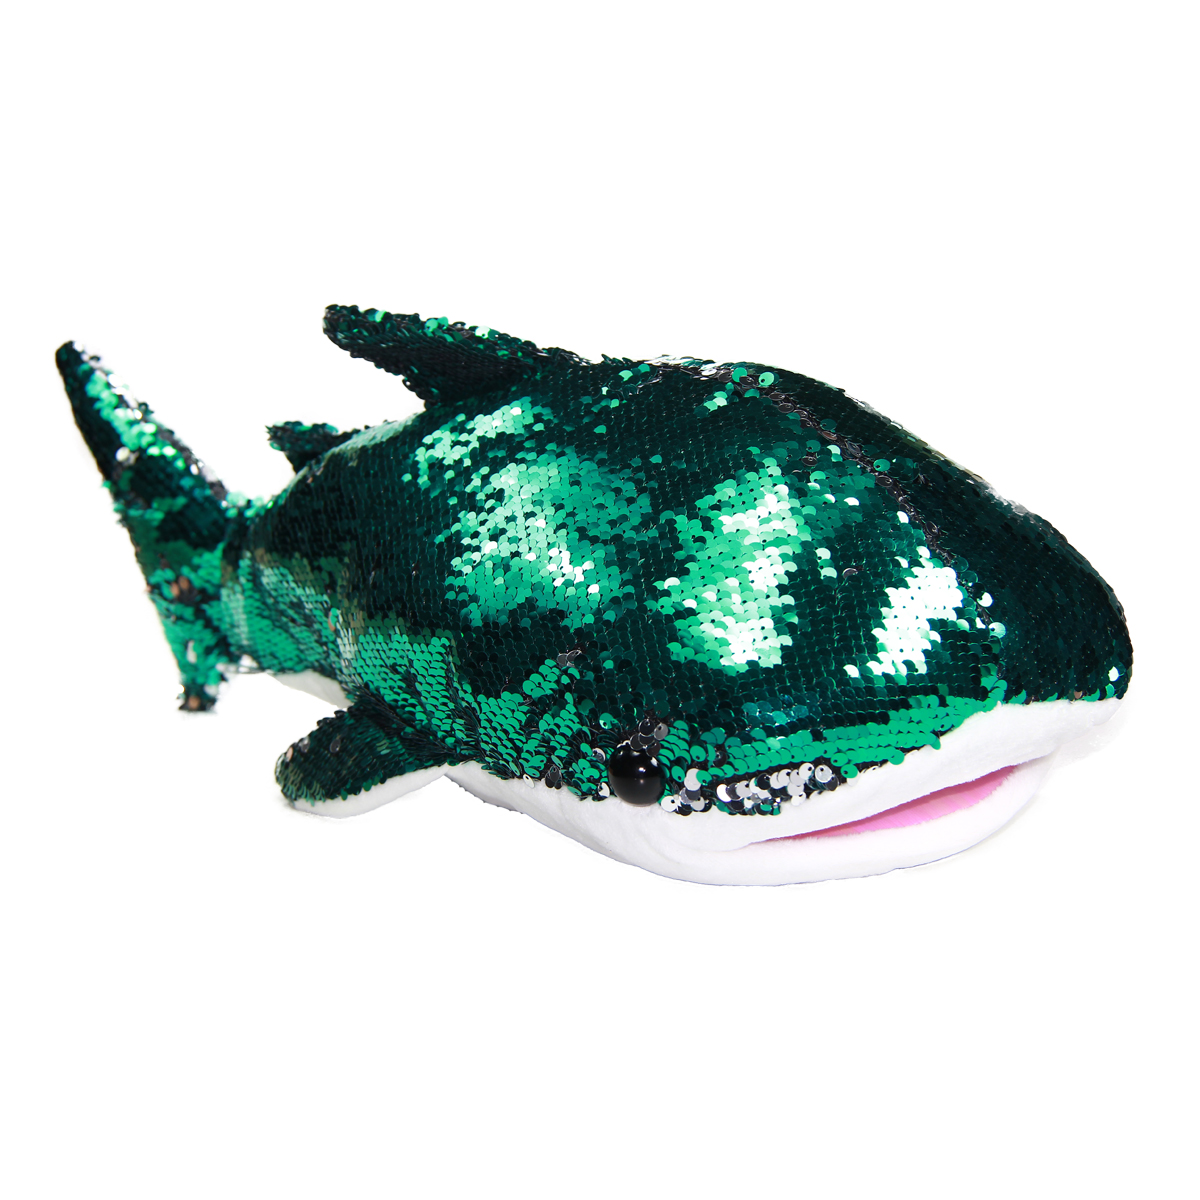 Shark Plush Doll, Flip Sequin, Big Size, Green Silver 17 Inches